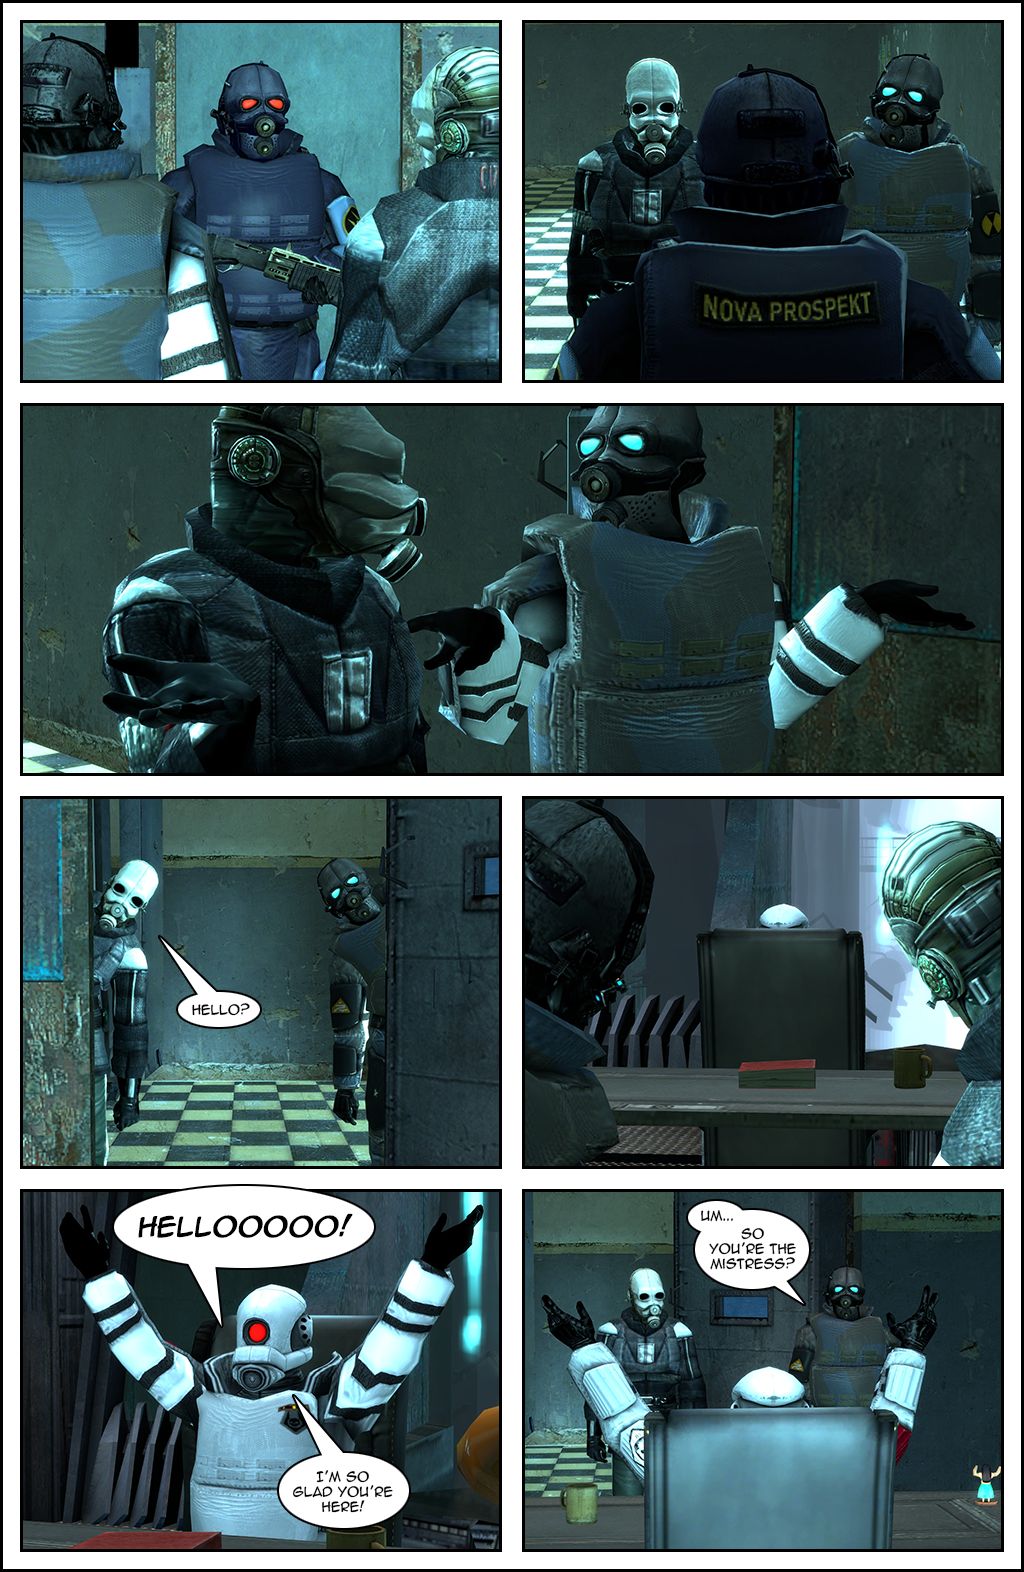 Laz simply stares at the cop and the soldier, who stare back and then shrug at each other. They peek through the door and the cop asks hello. A chair is turned around inside with someone sitting in it. The chair swings around and a Combine Overwatch elite soldier shouts hello, then says she’s so glad they’re there. The soldier asks if she is the mistress.